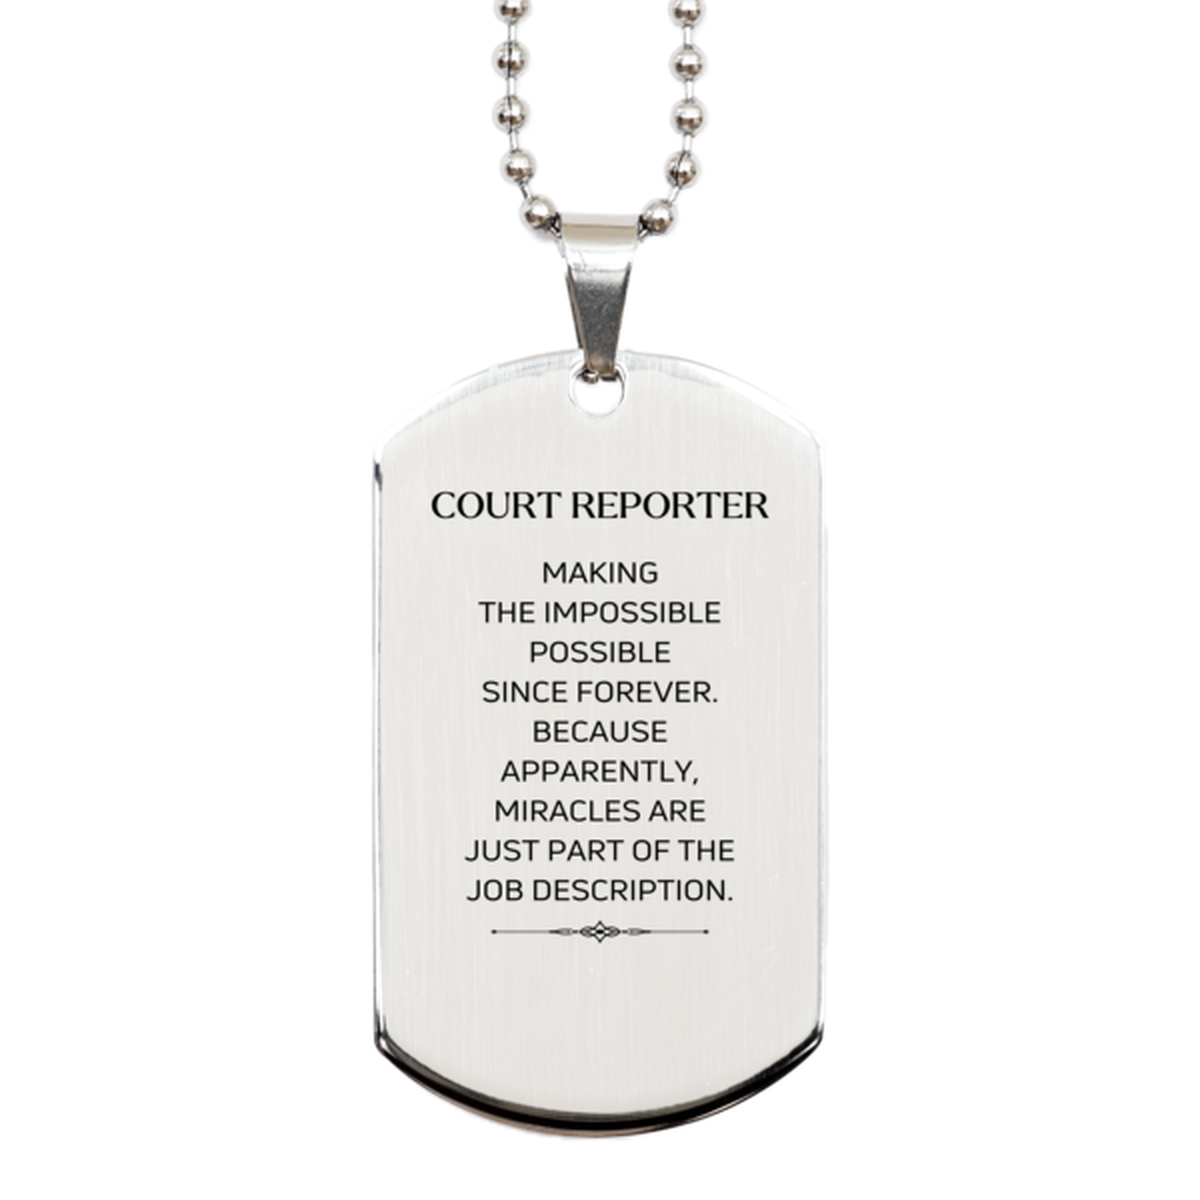 Funny Court Reporter Gifts, Miracles are just part of the job description, Inspirational Birthday Silver Dog Tag For Court Reporter, Men, Women, Coworkers, Friends, Boss